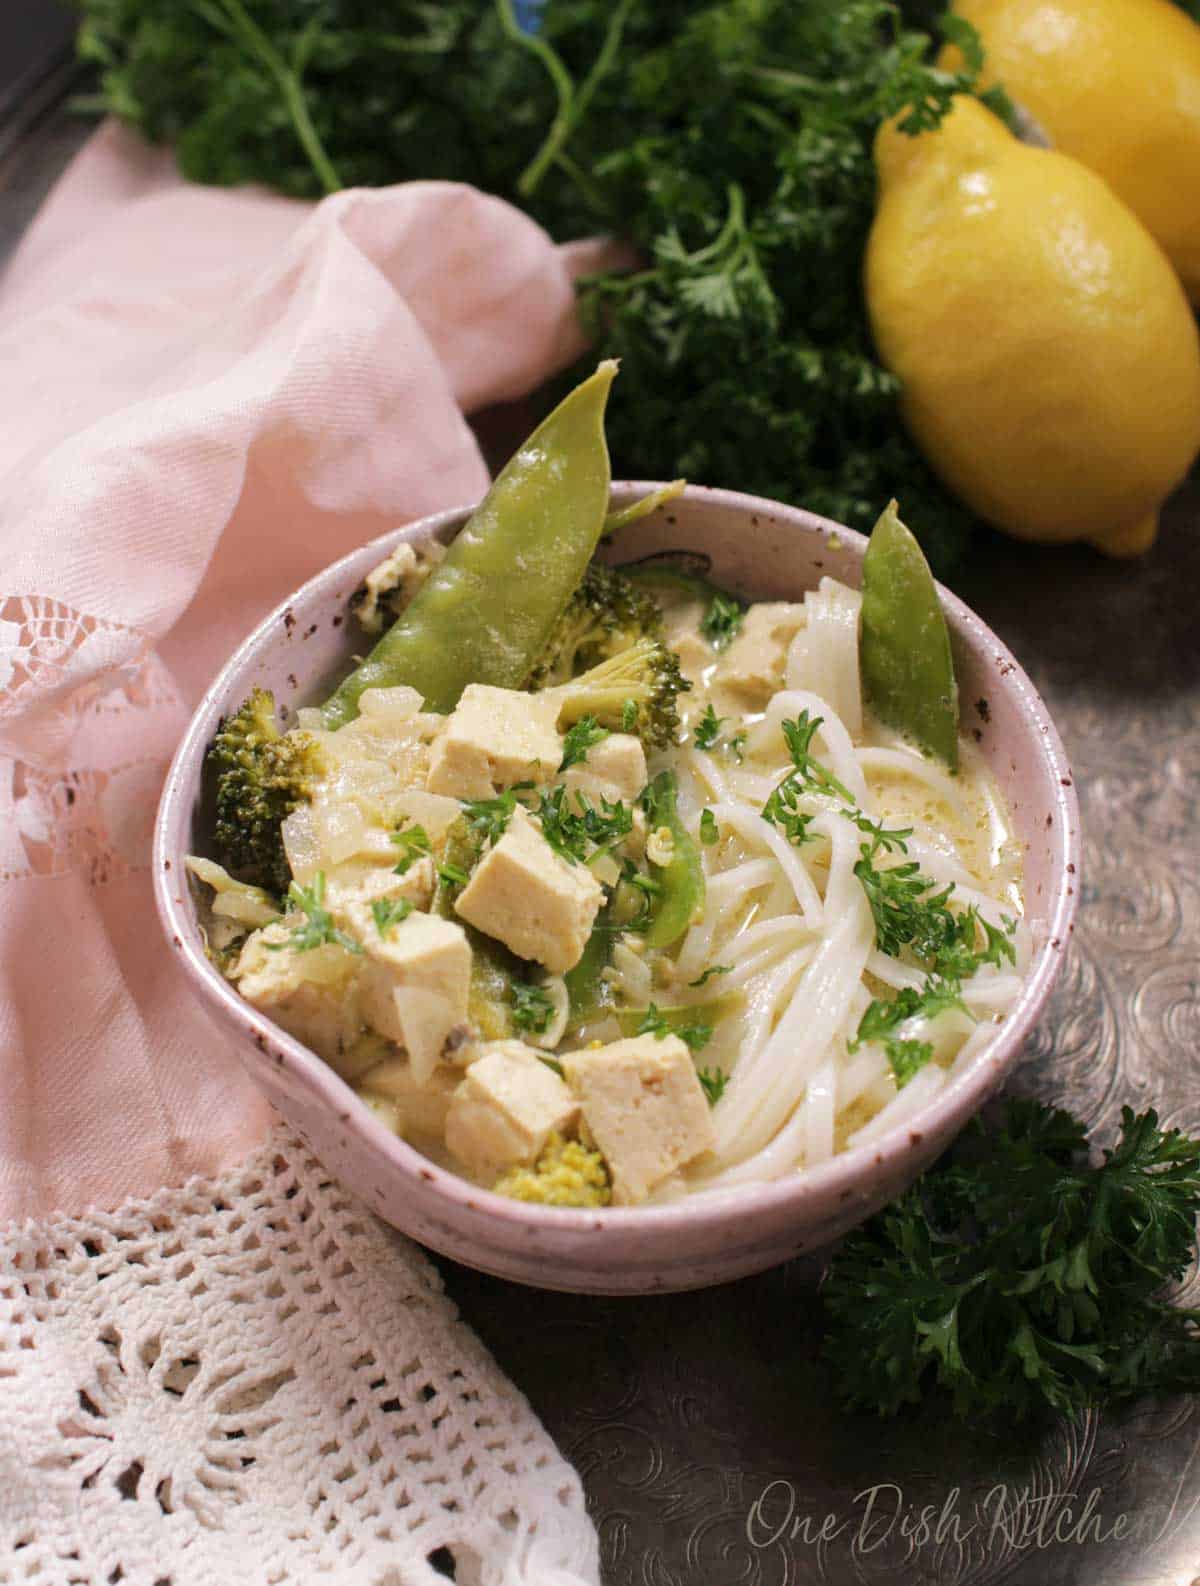 A bowl of green curry with tofu and noodles on a metal tray with a pink cloth napkin, parsley, and two lemons.